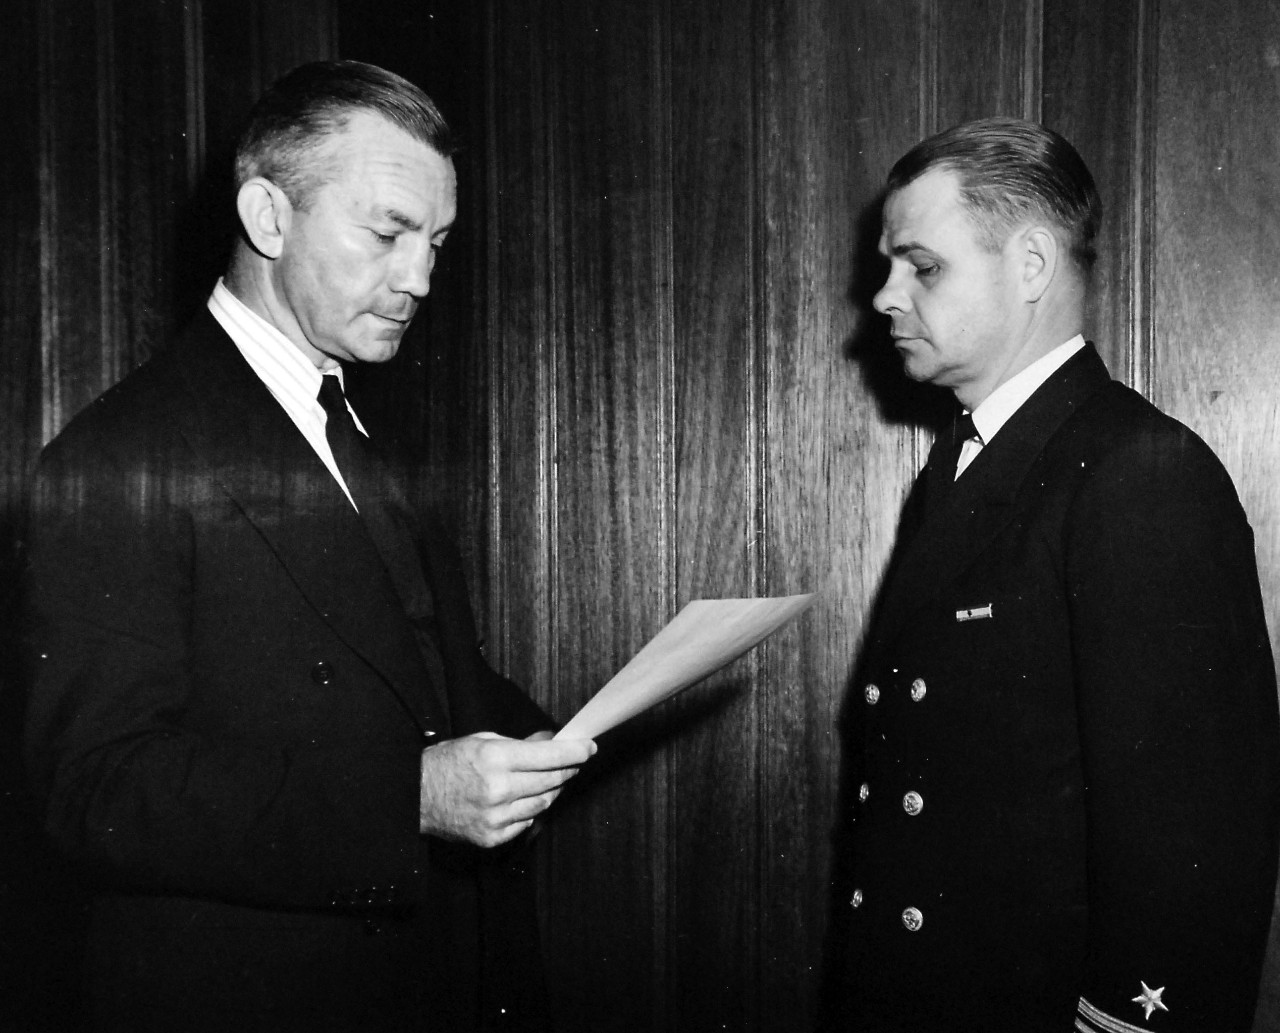 80-G-46614:  Secretary of the Navy James V. Forrestal presents to Lieutenant Commander Joseph H. Gibbons, Jr., USNR, a Presidential Unit Citation for clearing lanes on the heavily mined Normandy shoreline for a landing force of Allied troops on D-Day, June 6, 1944.  Released September 27, 1944.  U.S. Navy Photograph, now in the collections of the National Archives.  (2016/06/07).